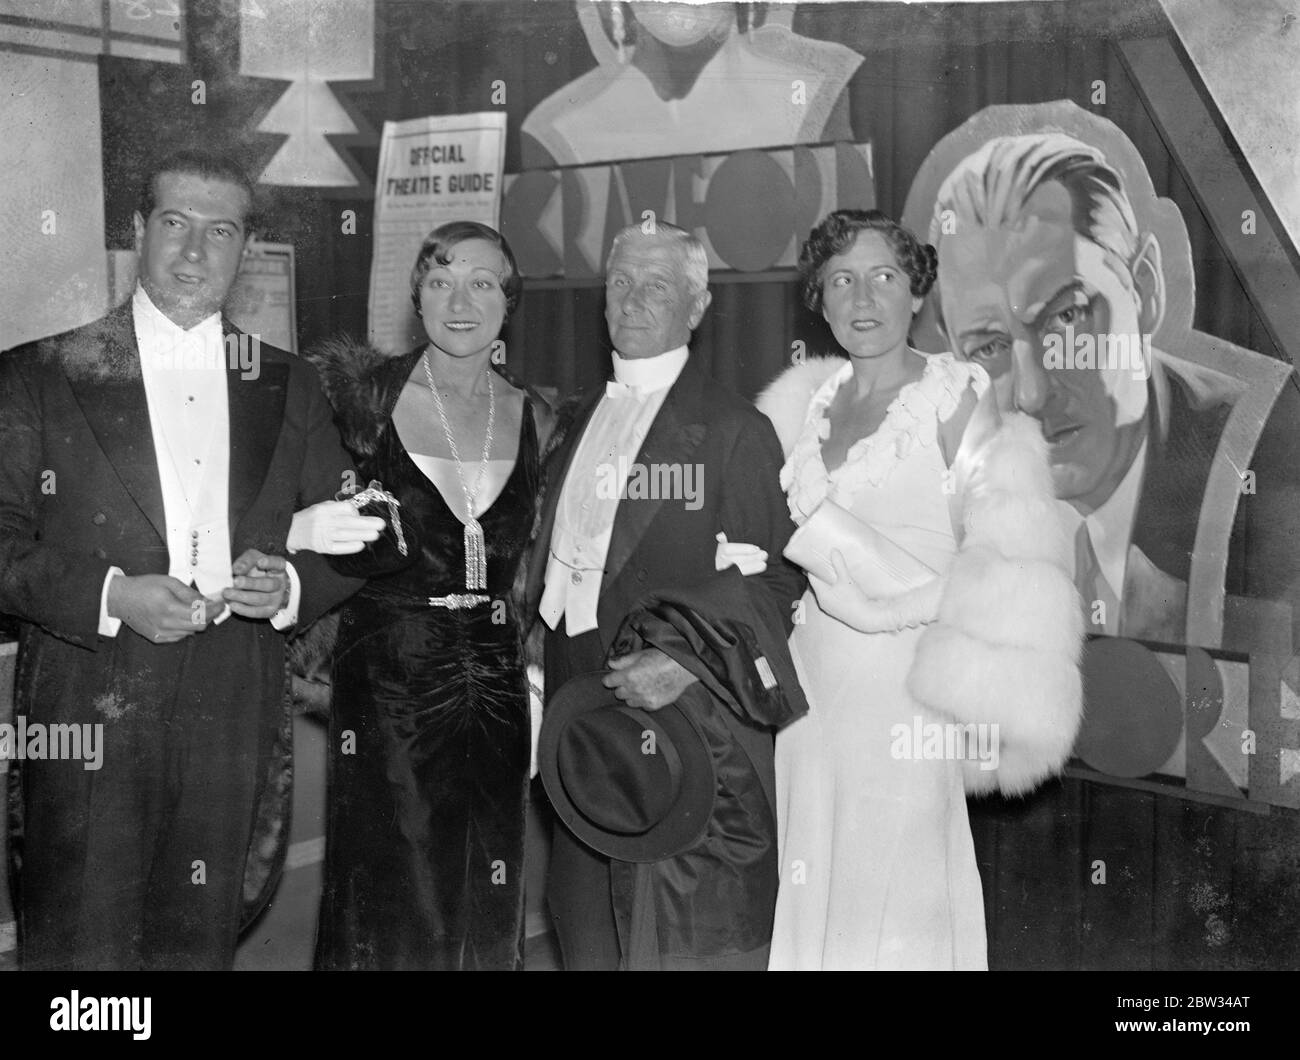 Famous  Dolly Sister  at first night of  Grand Hotel  film in London . Among famous personalities attending the first night of the film of Vicki Baum 's famous novel  Grand Hotel  at the Palace Theatre in London was Rosie Dolly , one of the famous Dolly sisters , and her husband , Mr Irving Netcher . Left to right : Mr Irving Netcher , Miss Rosie Dolly , Dr Maddick , and Mrs Eddie Goulding , wife of the British director who made  Grand Hotel  in Hollywood . She was formerly Miss Marjorie Moss , an American actress . 21 September 1932 Stock Photo